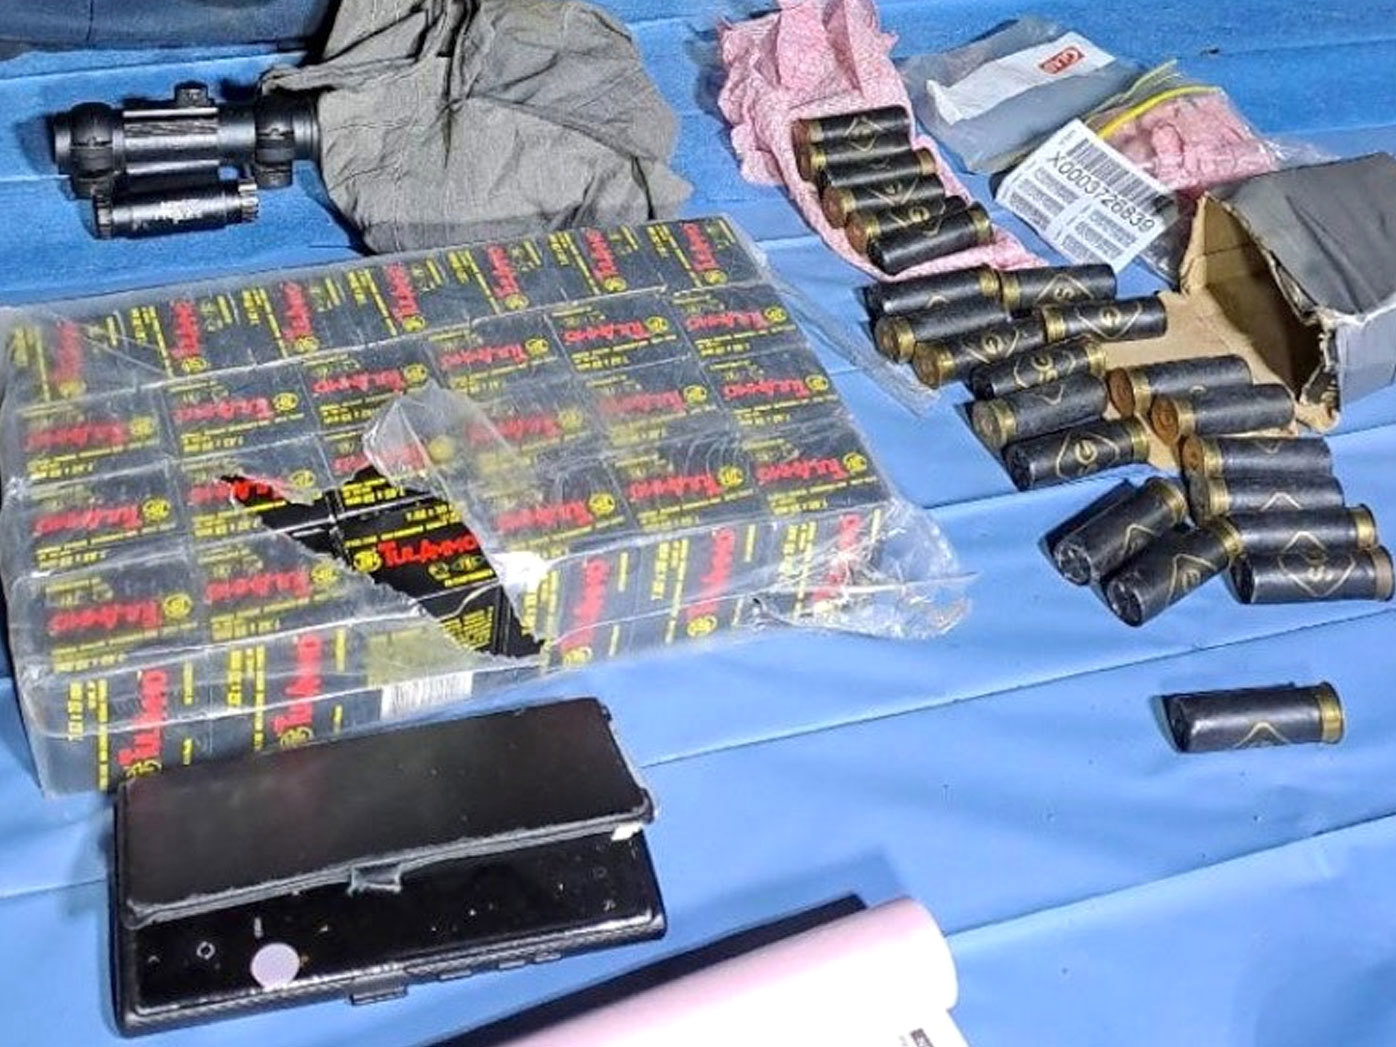 Ammunition allegedly found at one of the Strathfield properties.